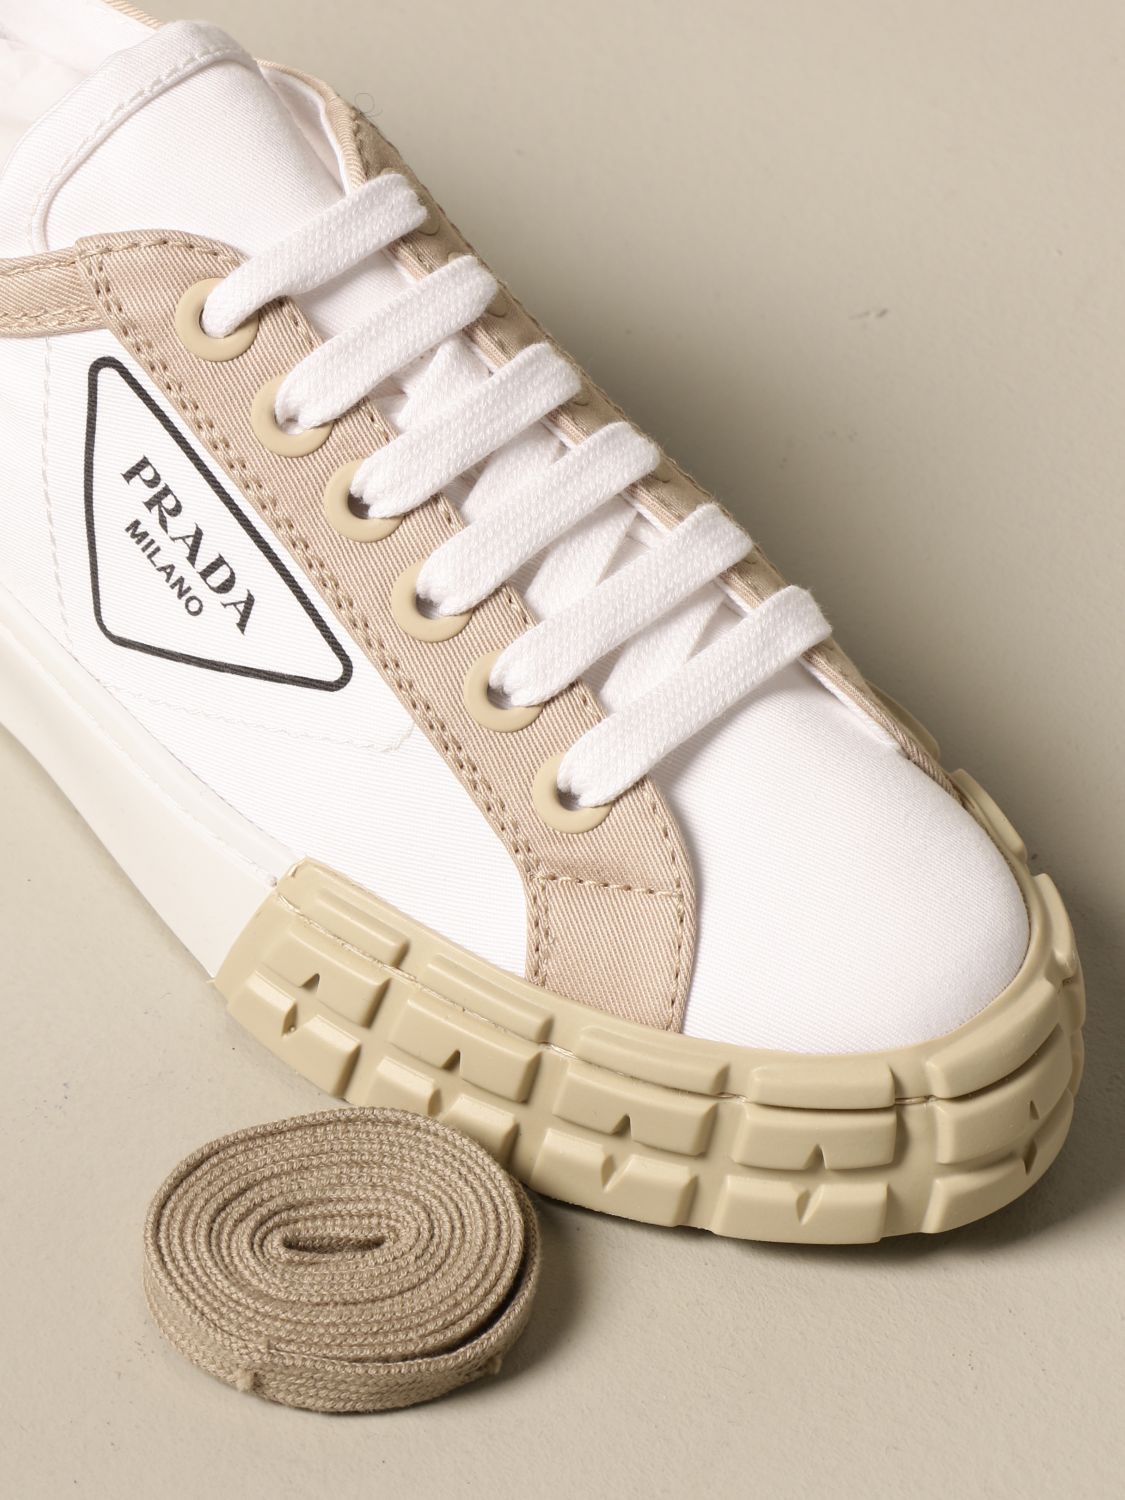 Prada sneakers in cotton canvas and leather